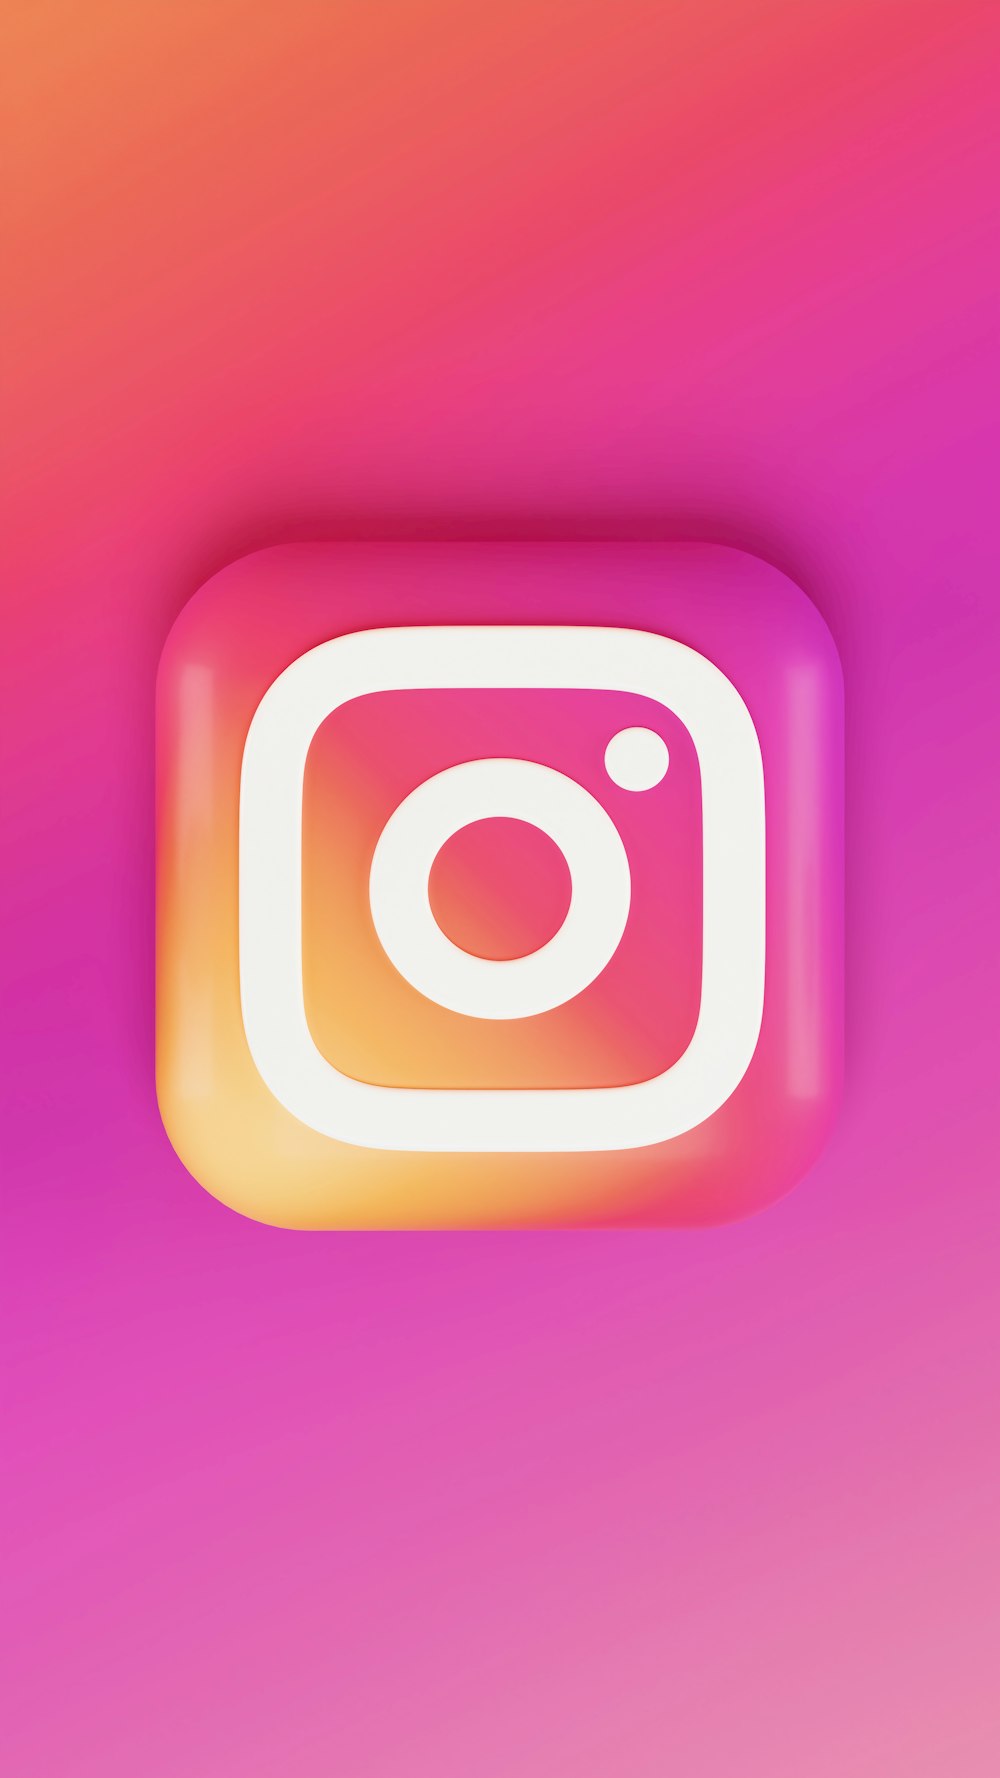 500+ Instagram Stories Pictures [HD] | Download Free Images on Unsplash